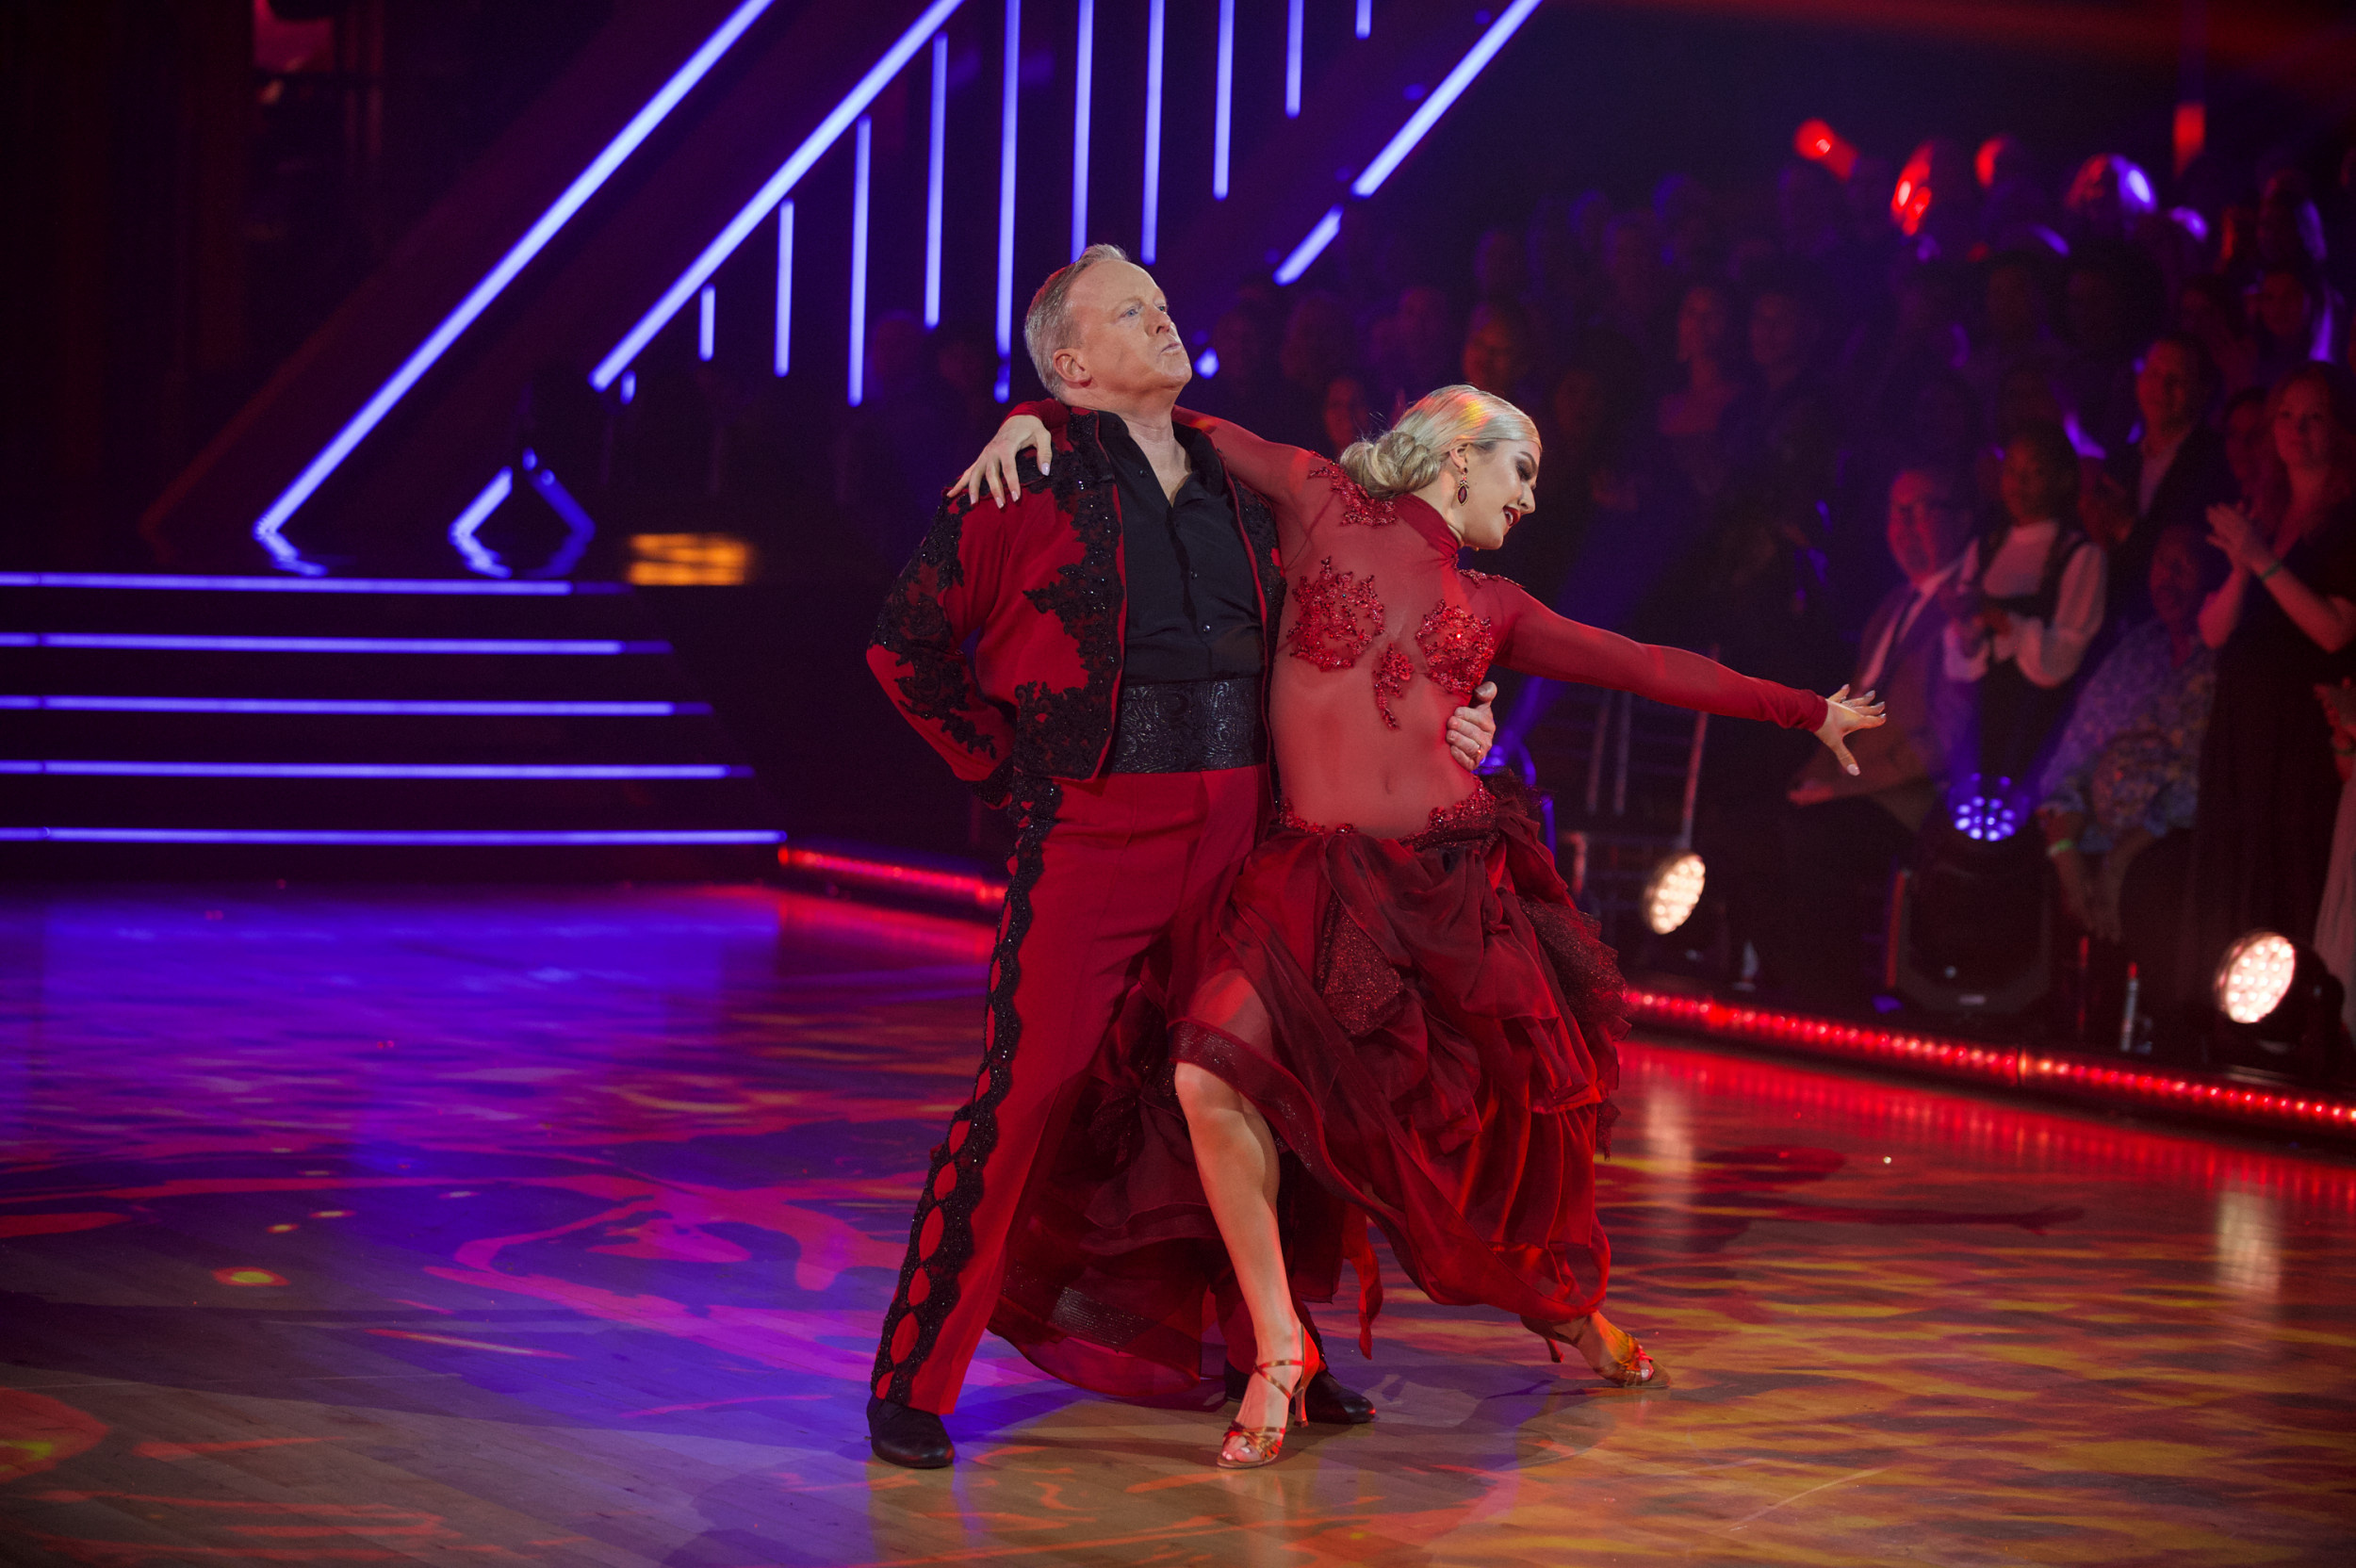 Pasodoble: Dancing with the Stars, Episode Three, All Paso, Some Doble, A Latin Ballroom Dance. 2500x1670 HD Background.